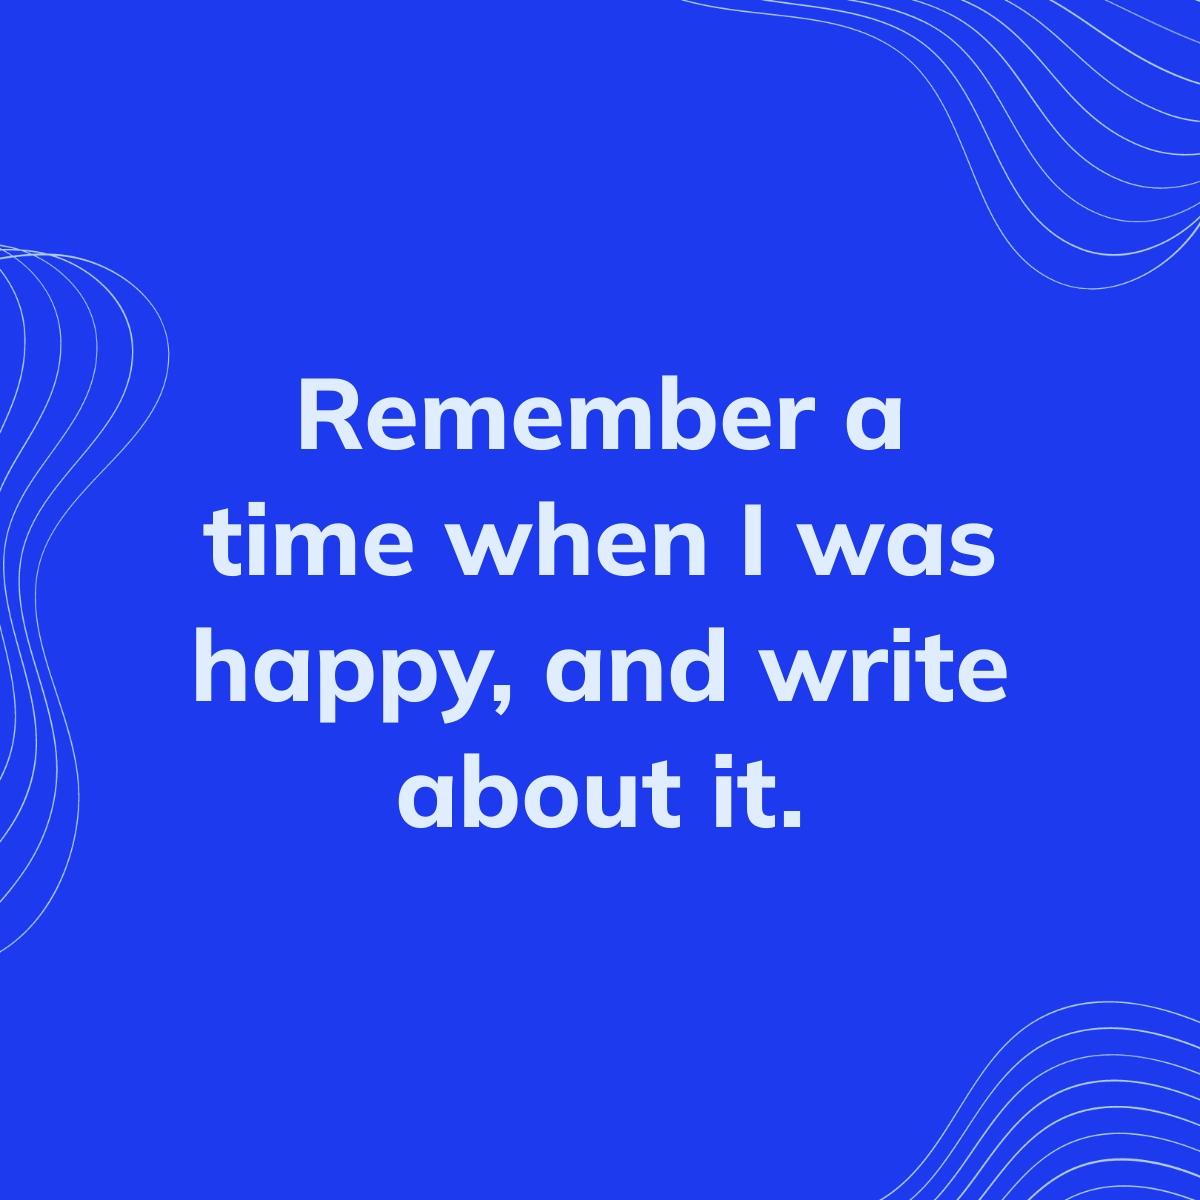 Journal Prompt: Remember a time when I was happy, and write about it.